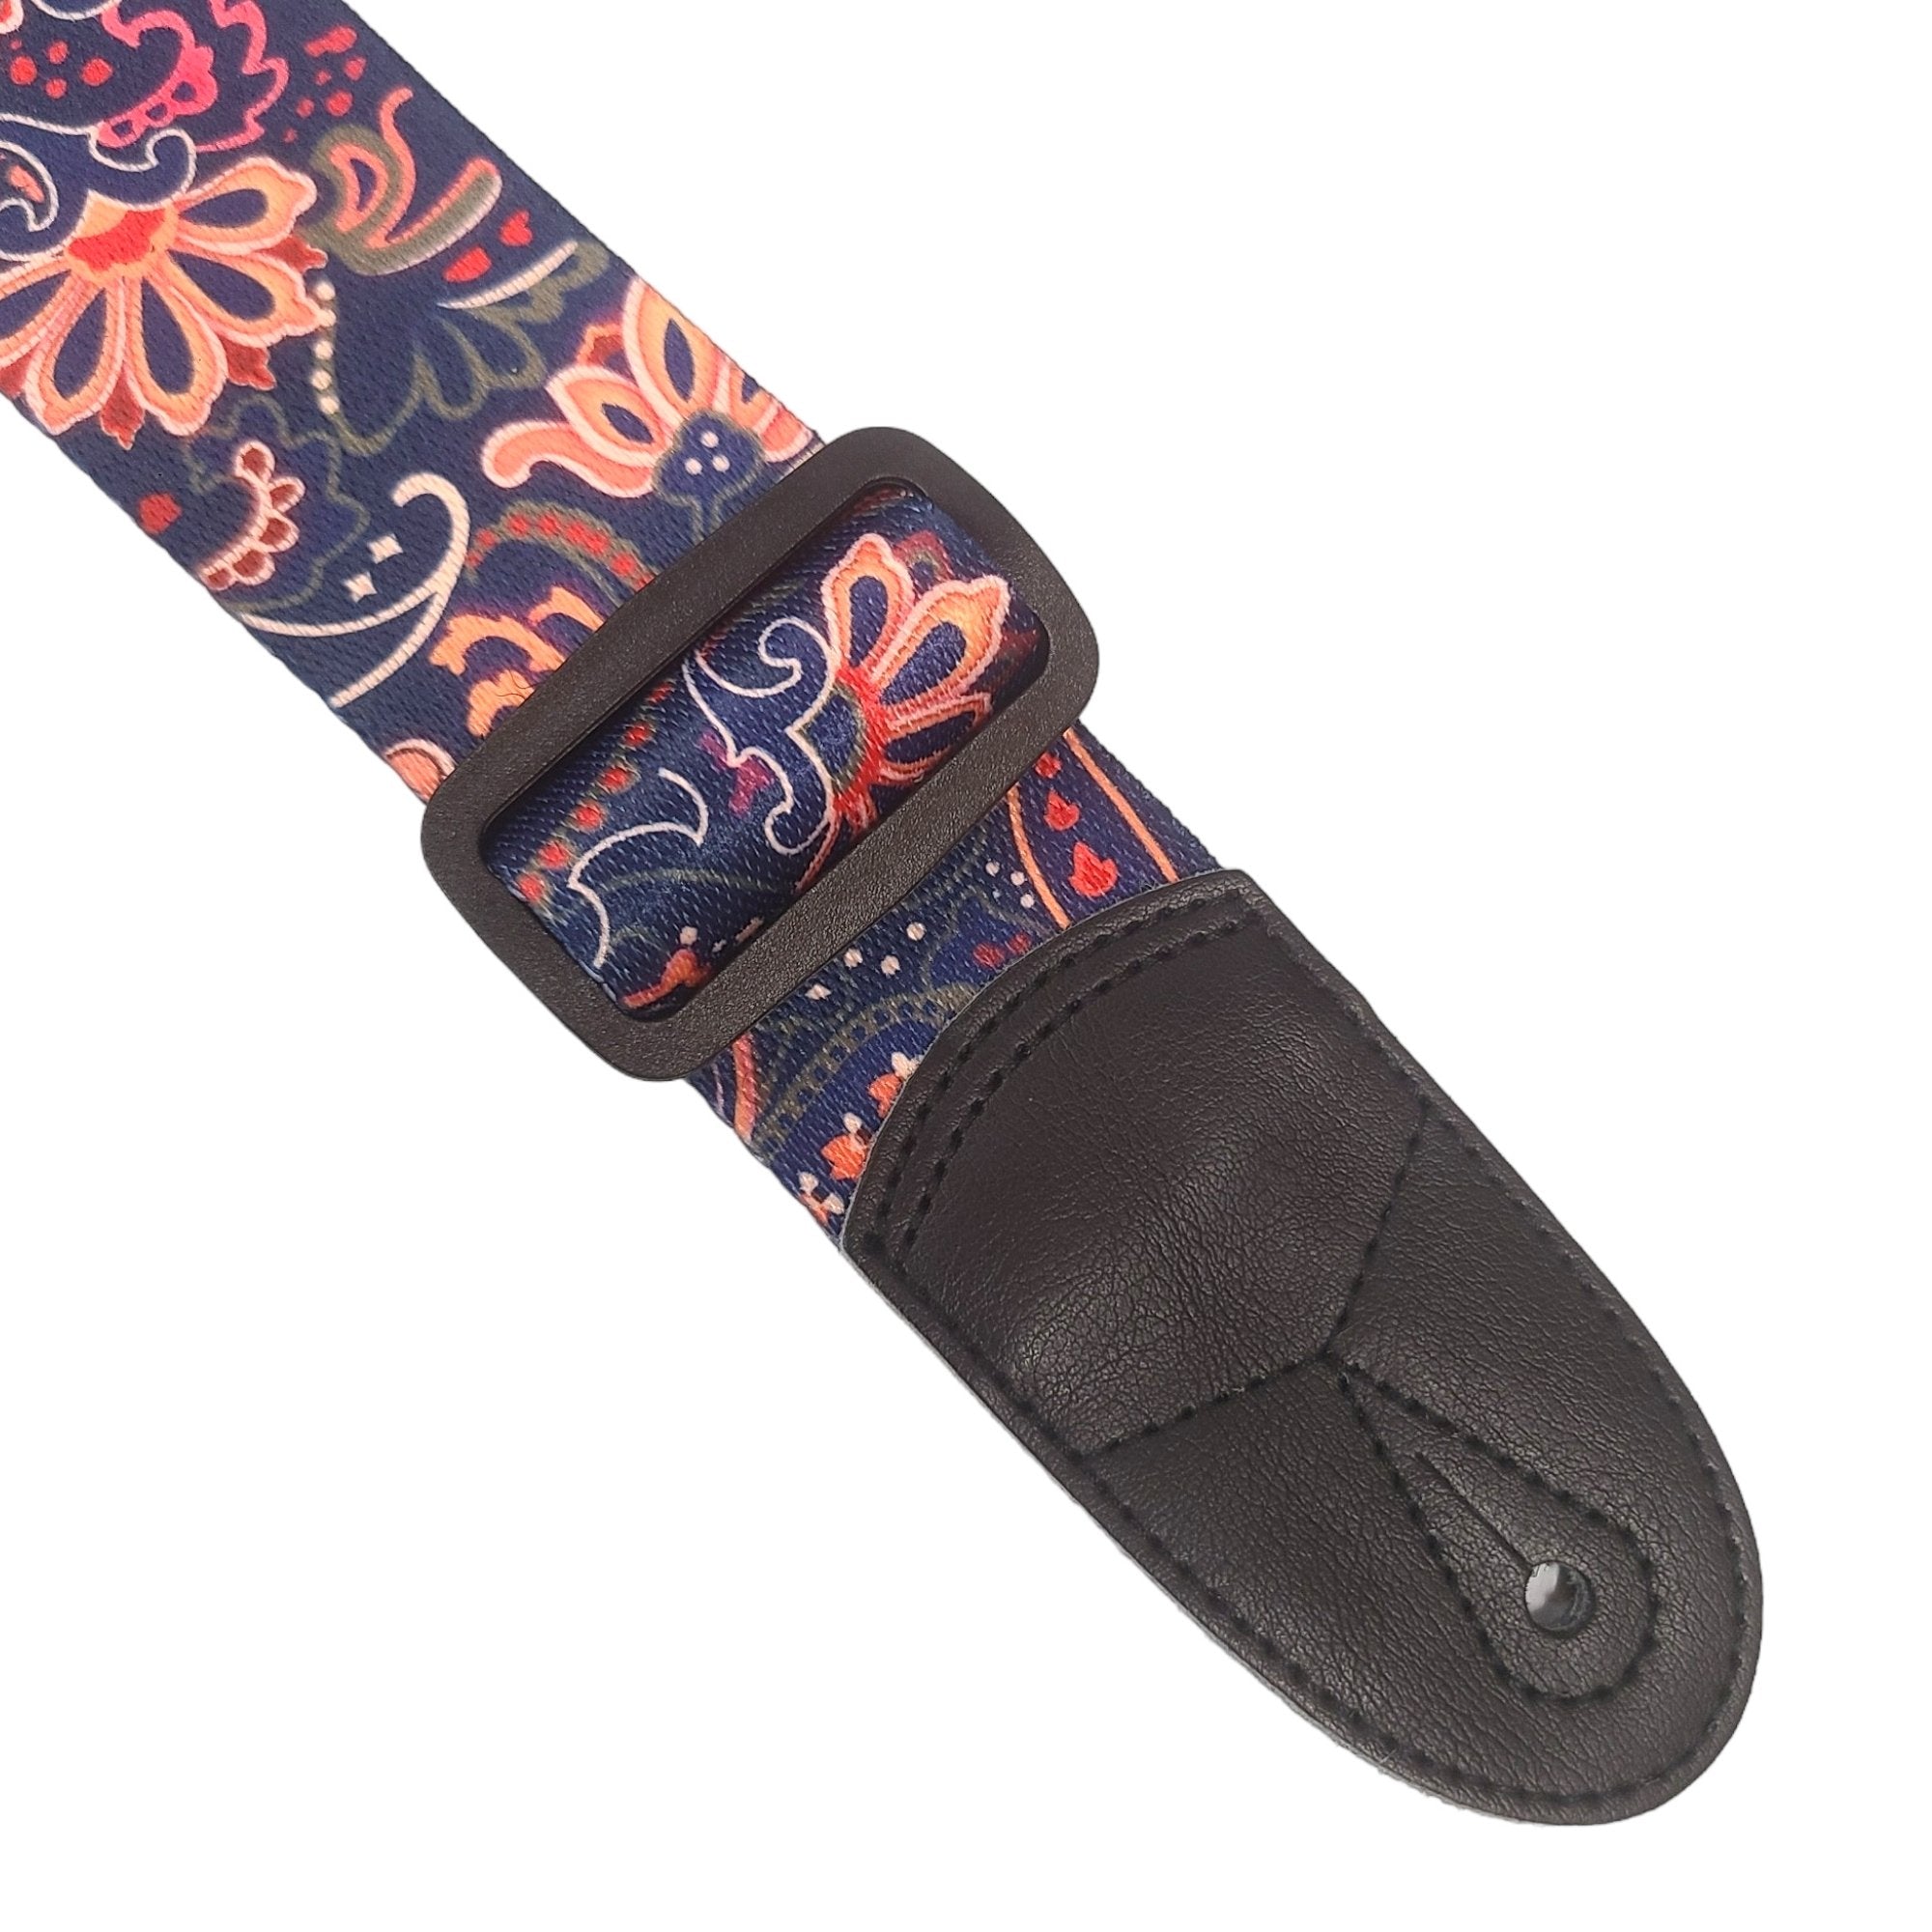 Paisley-Patterned Nylon Guitar Strap with Genuine Leather Ends